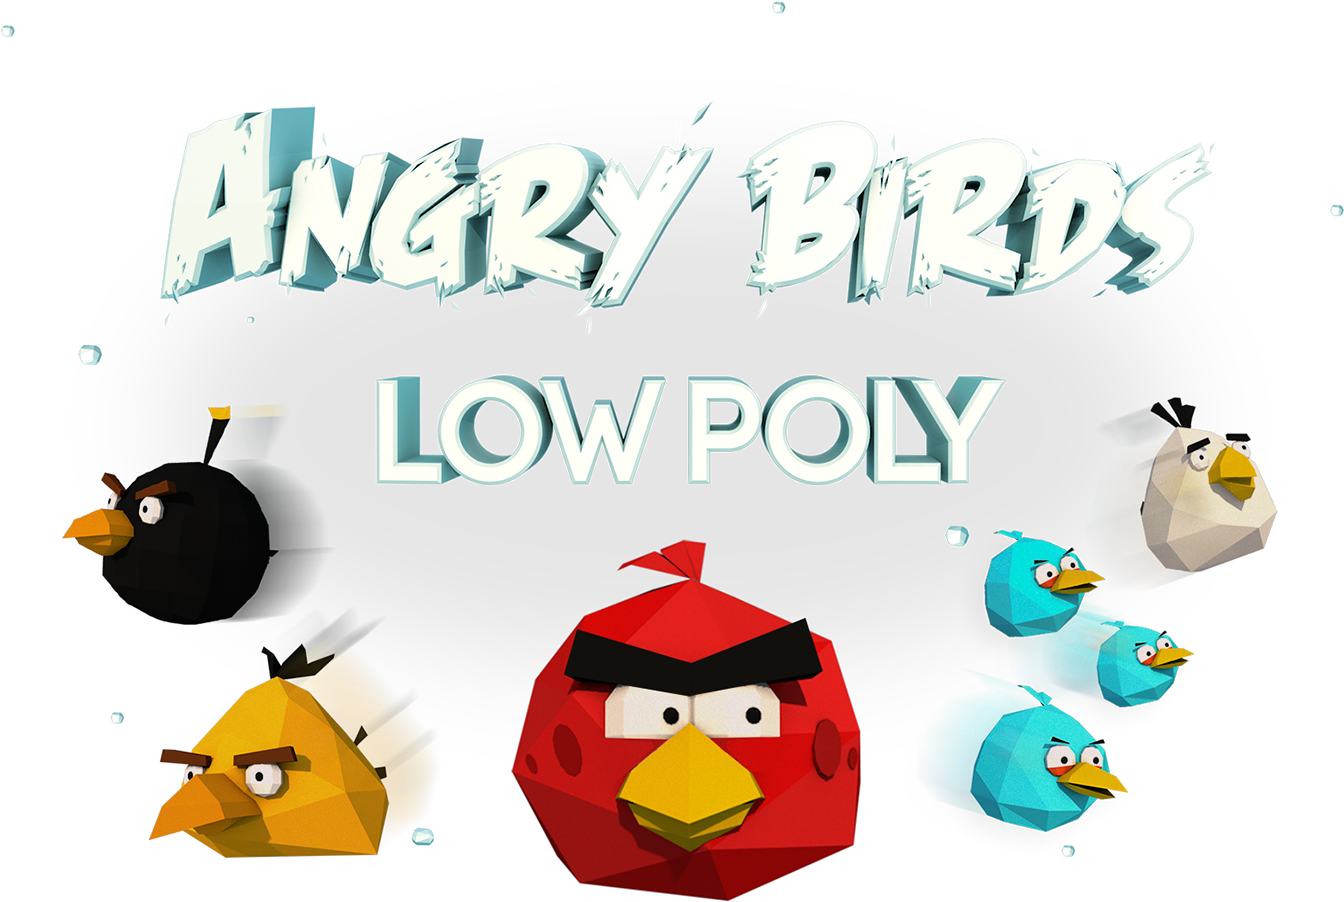 Low Poly Angry Birds (1400x1050)